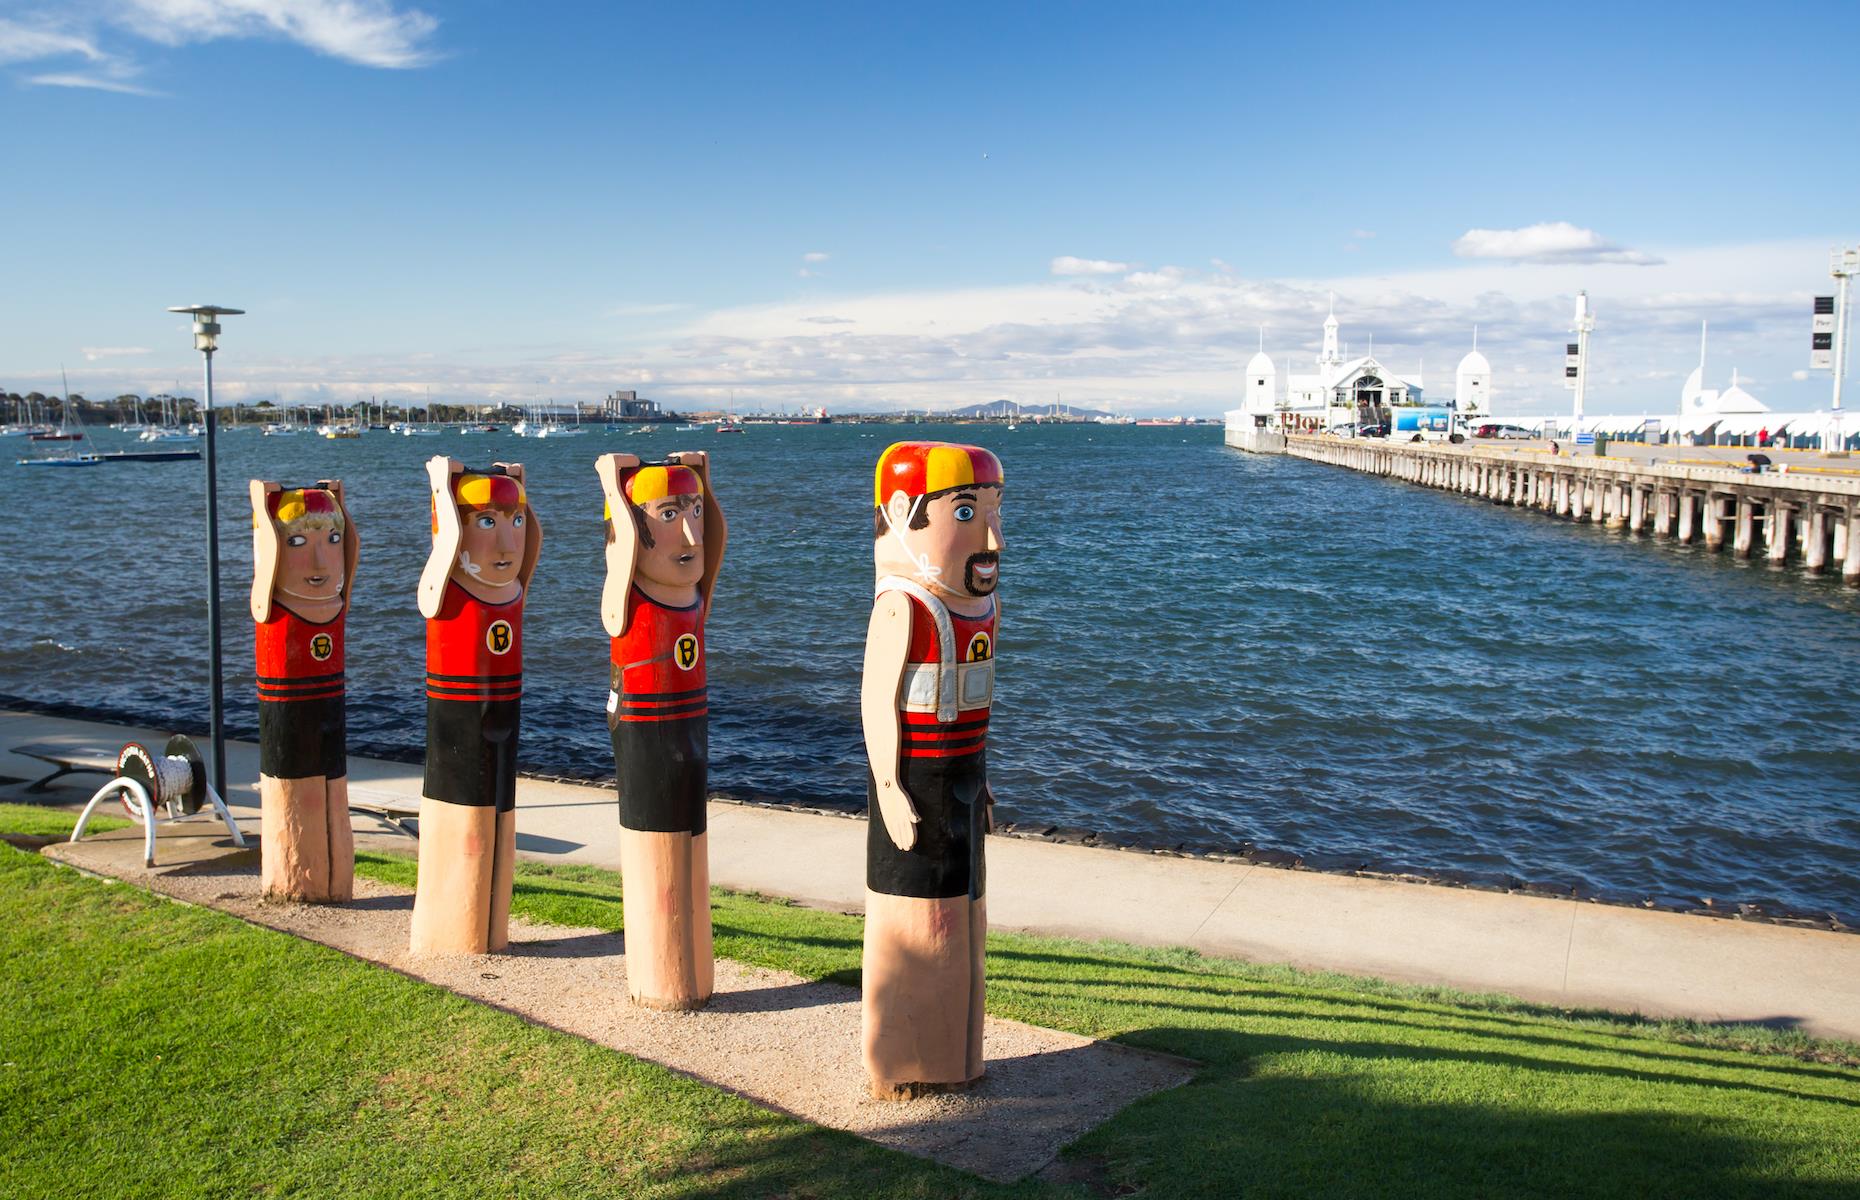 <p>Geelong is also the place for a dose of seaside nostalgia. Take a turn on the Geelong Carousel, a gorgeous hand-carved wooden fairground ride built in 1892, and stroll along its pier. An industrial pier was first built here in the 1850s, which was rebuilt and renamed the Cunningham Pier in 1929. Look out for the colorful carved bollards as you pootle around the waterfront – these 104 painted characters were fashioned from old timber pier pylons. You can really embed yourself in the local history by staying at one of Victoria’s oldest pastoral properties, Moranghurk, just out of town. This once-huge sheep station was founded in 1847 and its heritage bluestone shearer’s quarters have been restored as delightful rural hideaways.</p>  <p><a href="https://www.loveexploring.com/galleries/98864/the-worlds-most-historic-boardwalks-and-piers?page=1"><strong>These are the world's most charming historic piers and boardwalks</strong></a></p>